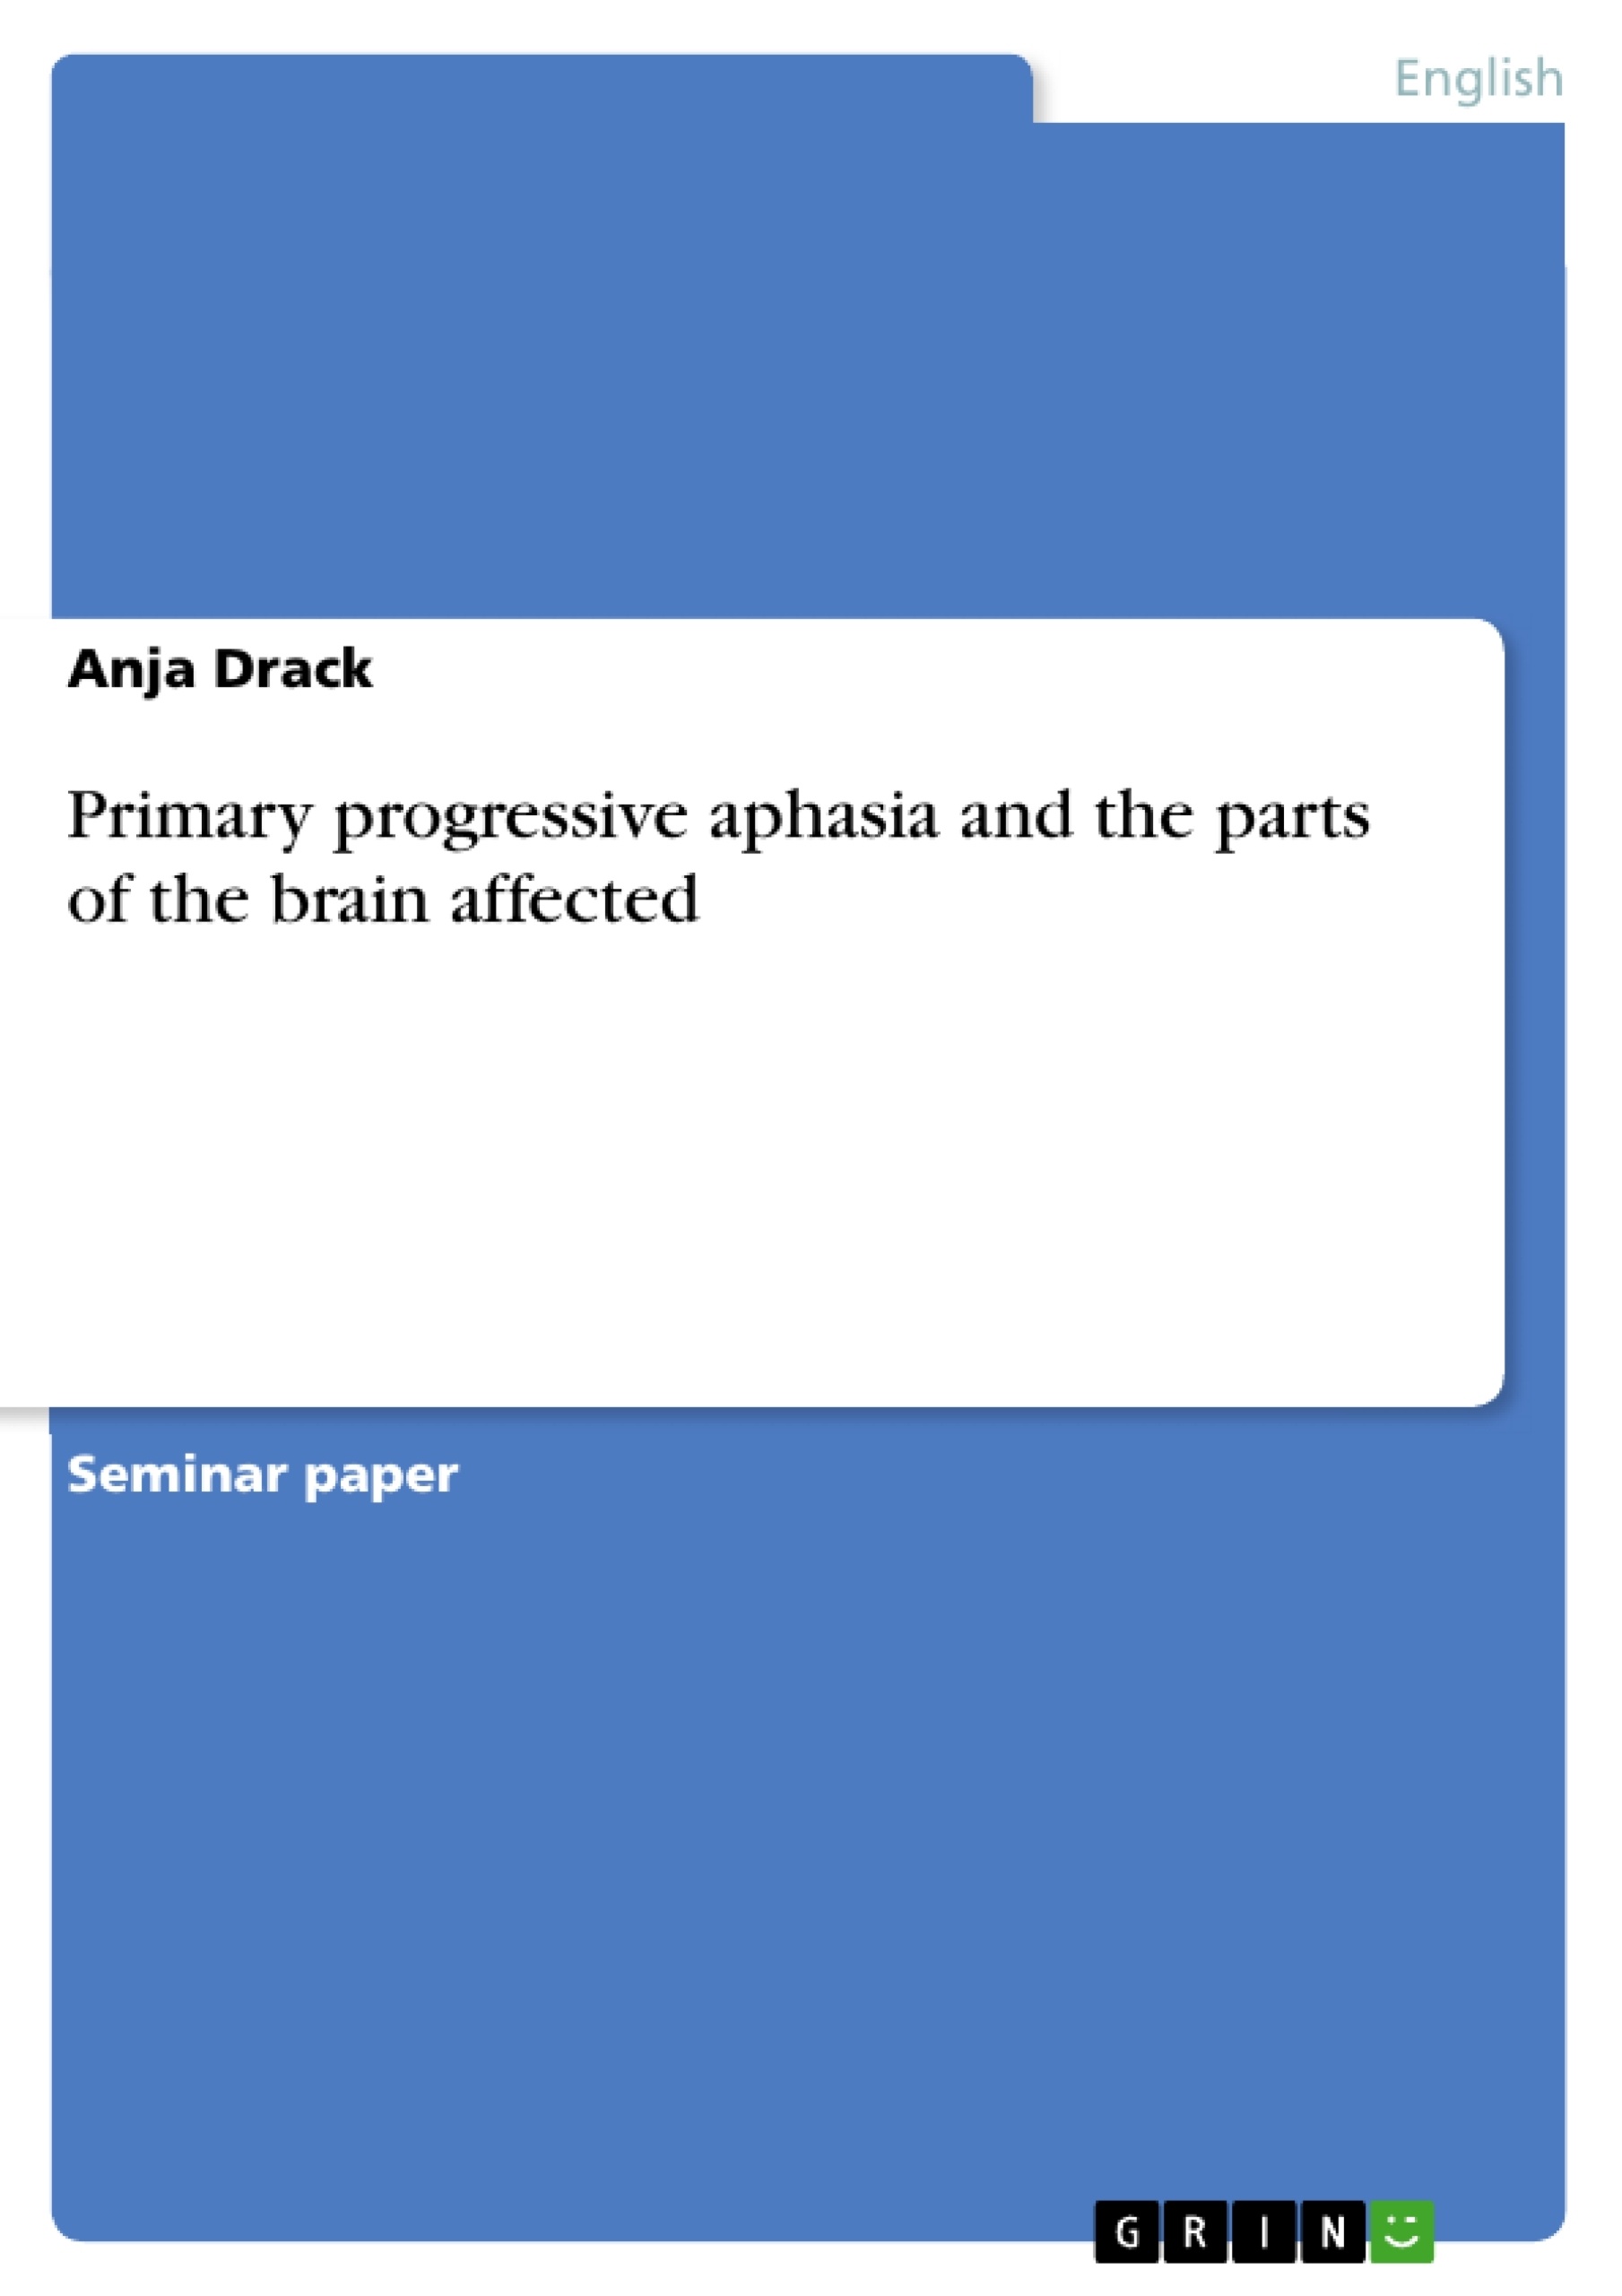 Titre: Primary progressive aphasia and the parts of the brain affected